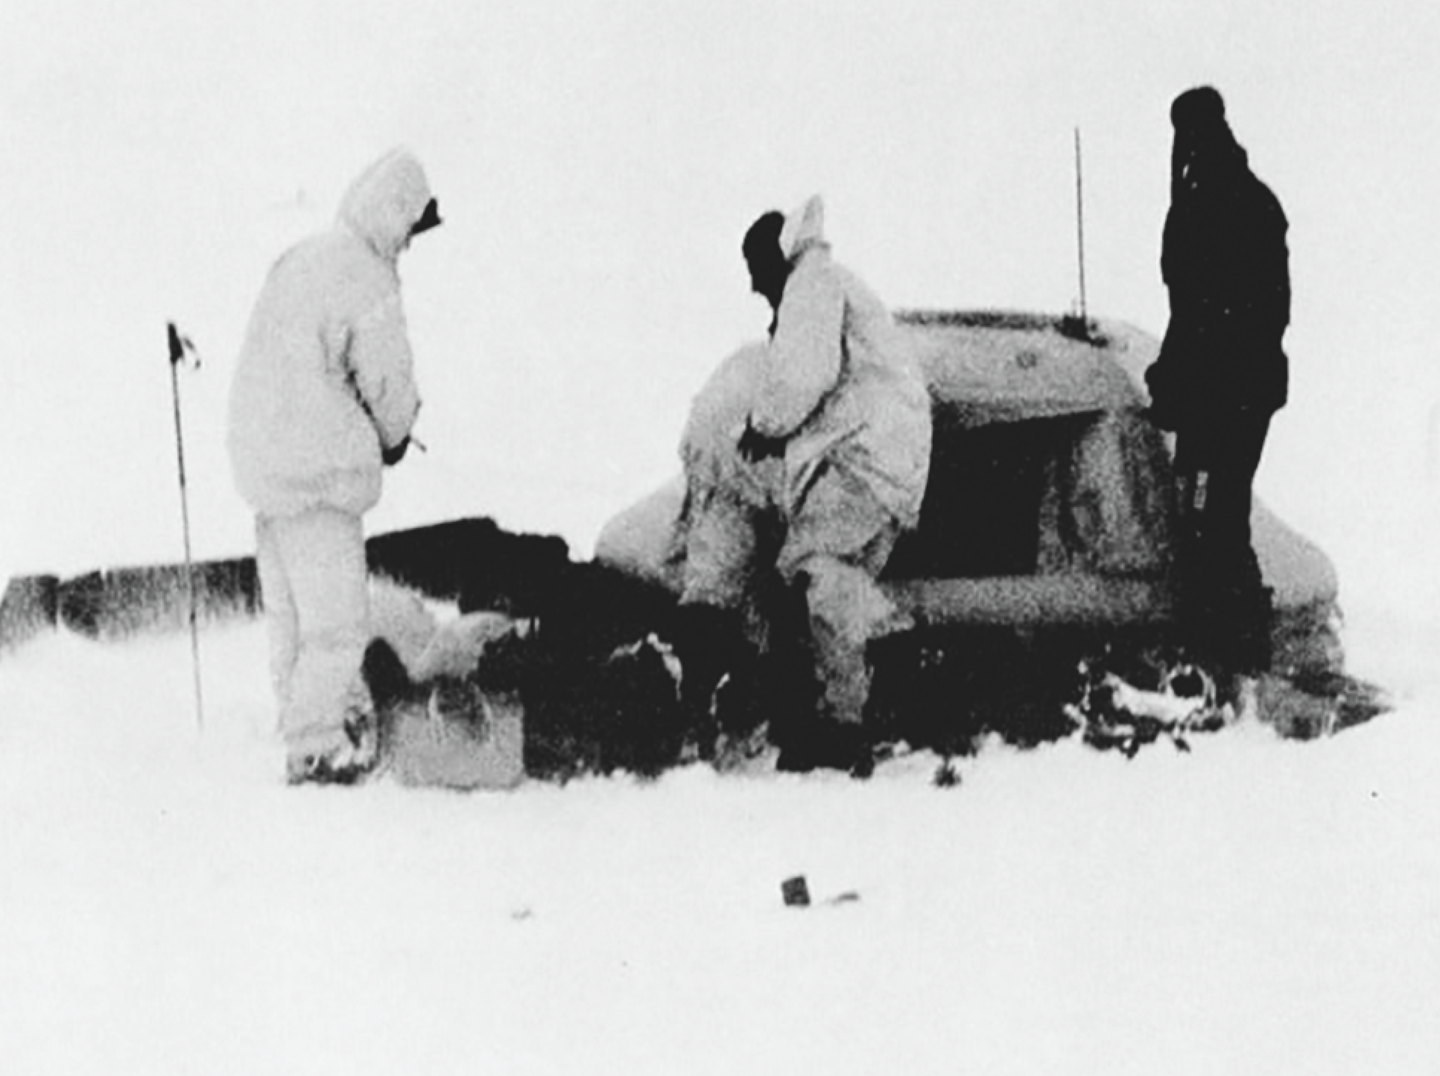 One of the helicopters’ survival life rafts was set up to provide shelter while the soldiers awaited rescue from Fortuna. <em>via publisher</em>